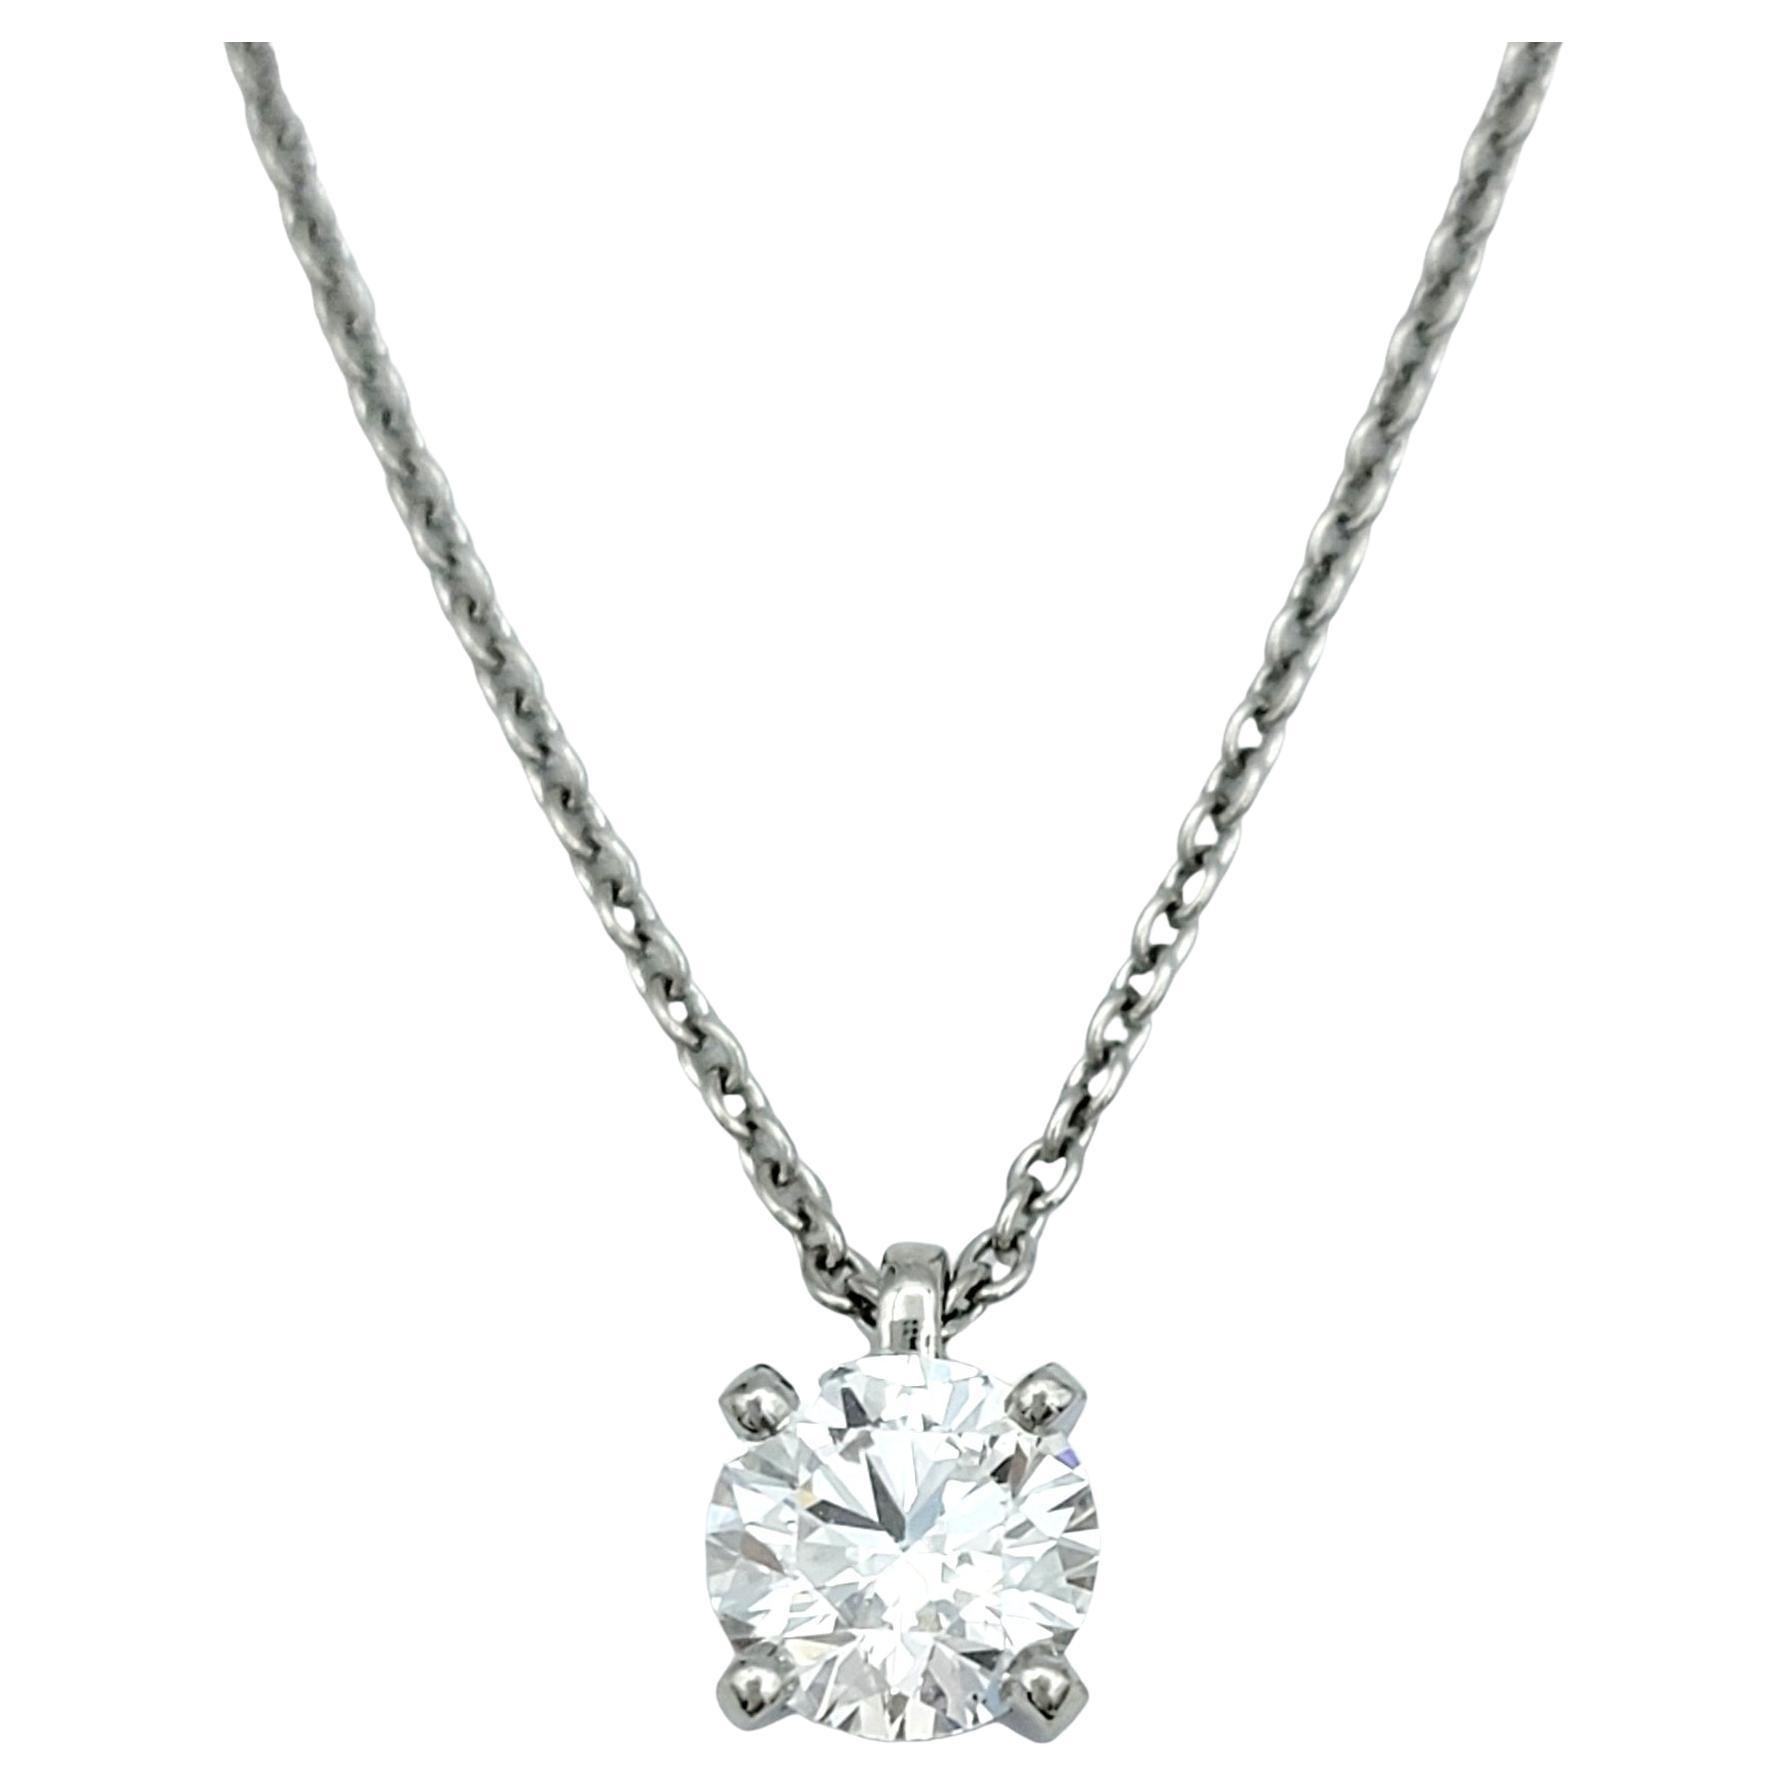 This stunning De Beers Classic diamond solitaire necklace is a symbol of refined elegance and timeless beauty. Set in luxurious polished platinum, the pendant features a dazzling .59 carat round brilliant cut diamond, meticulously chosen for its